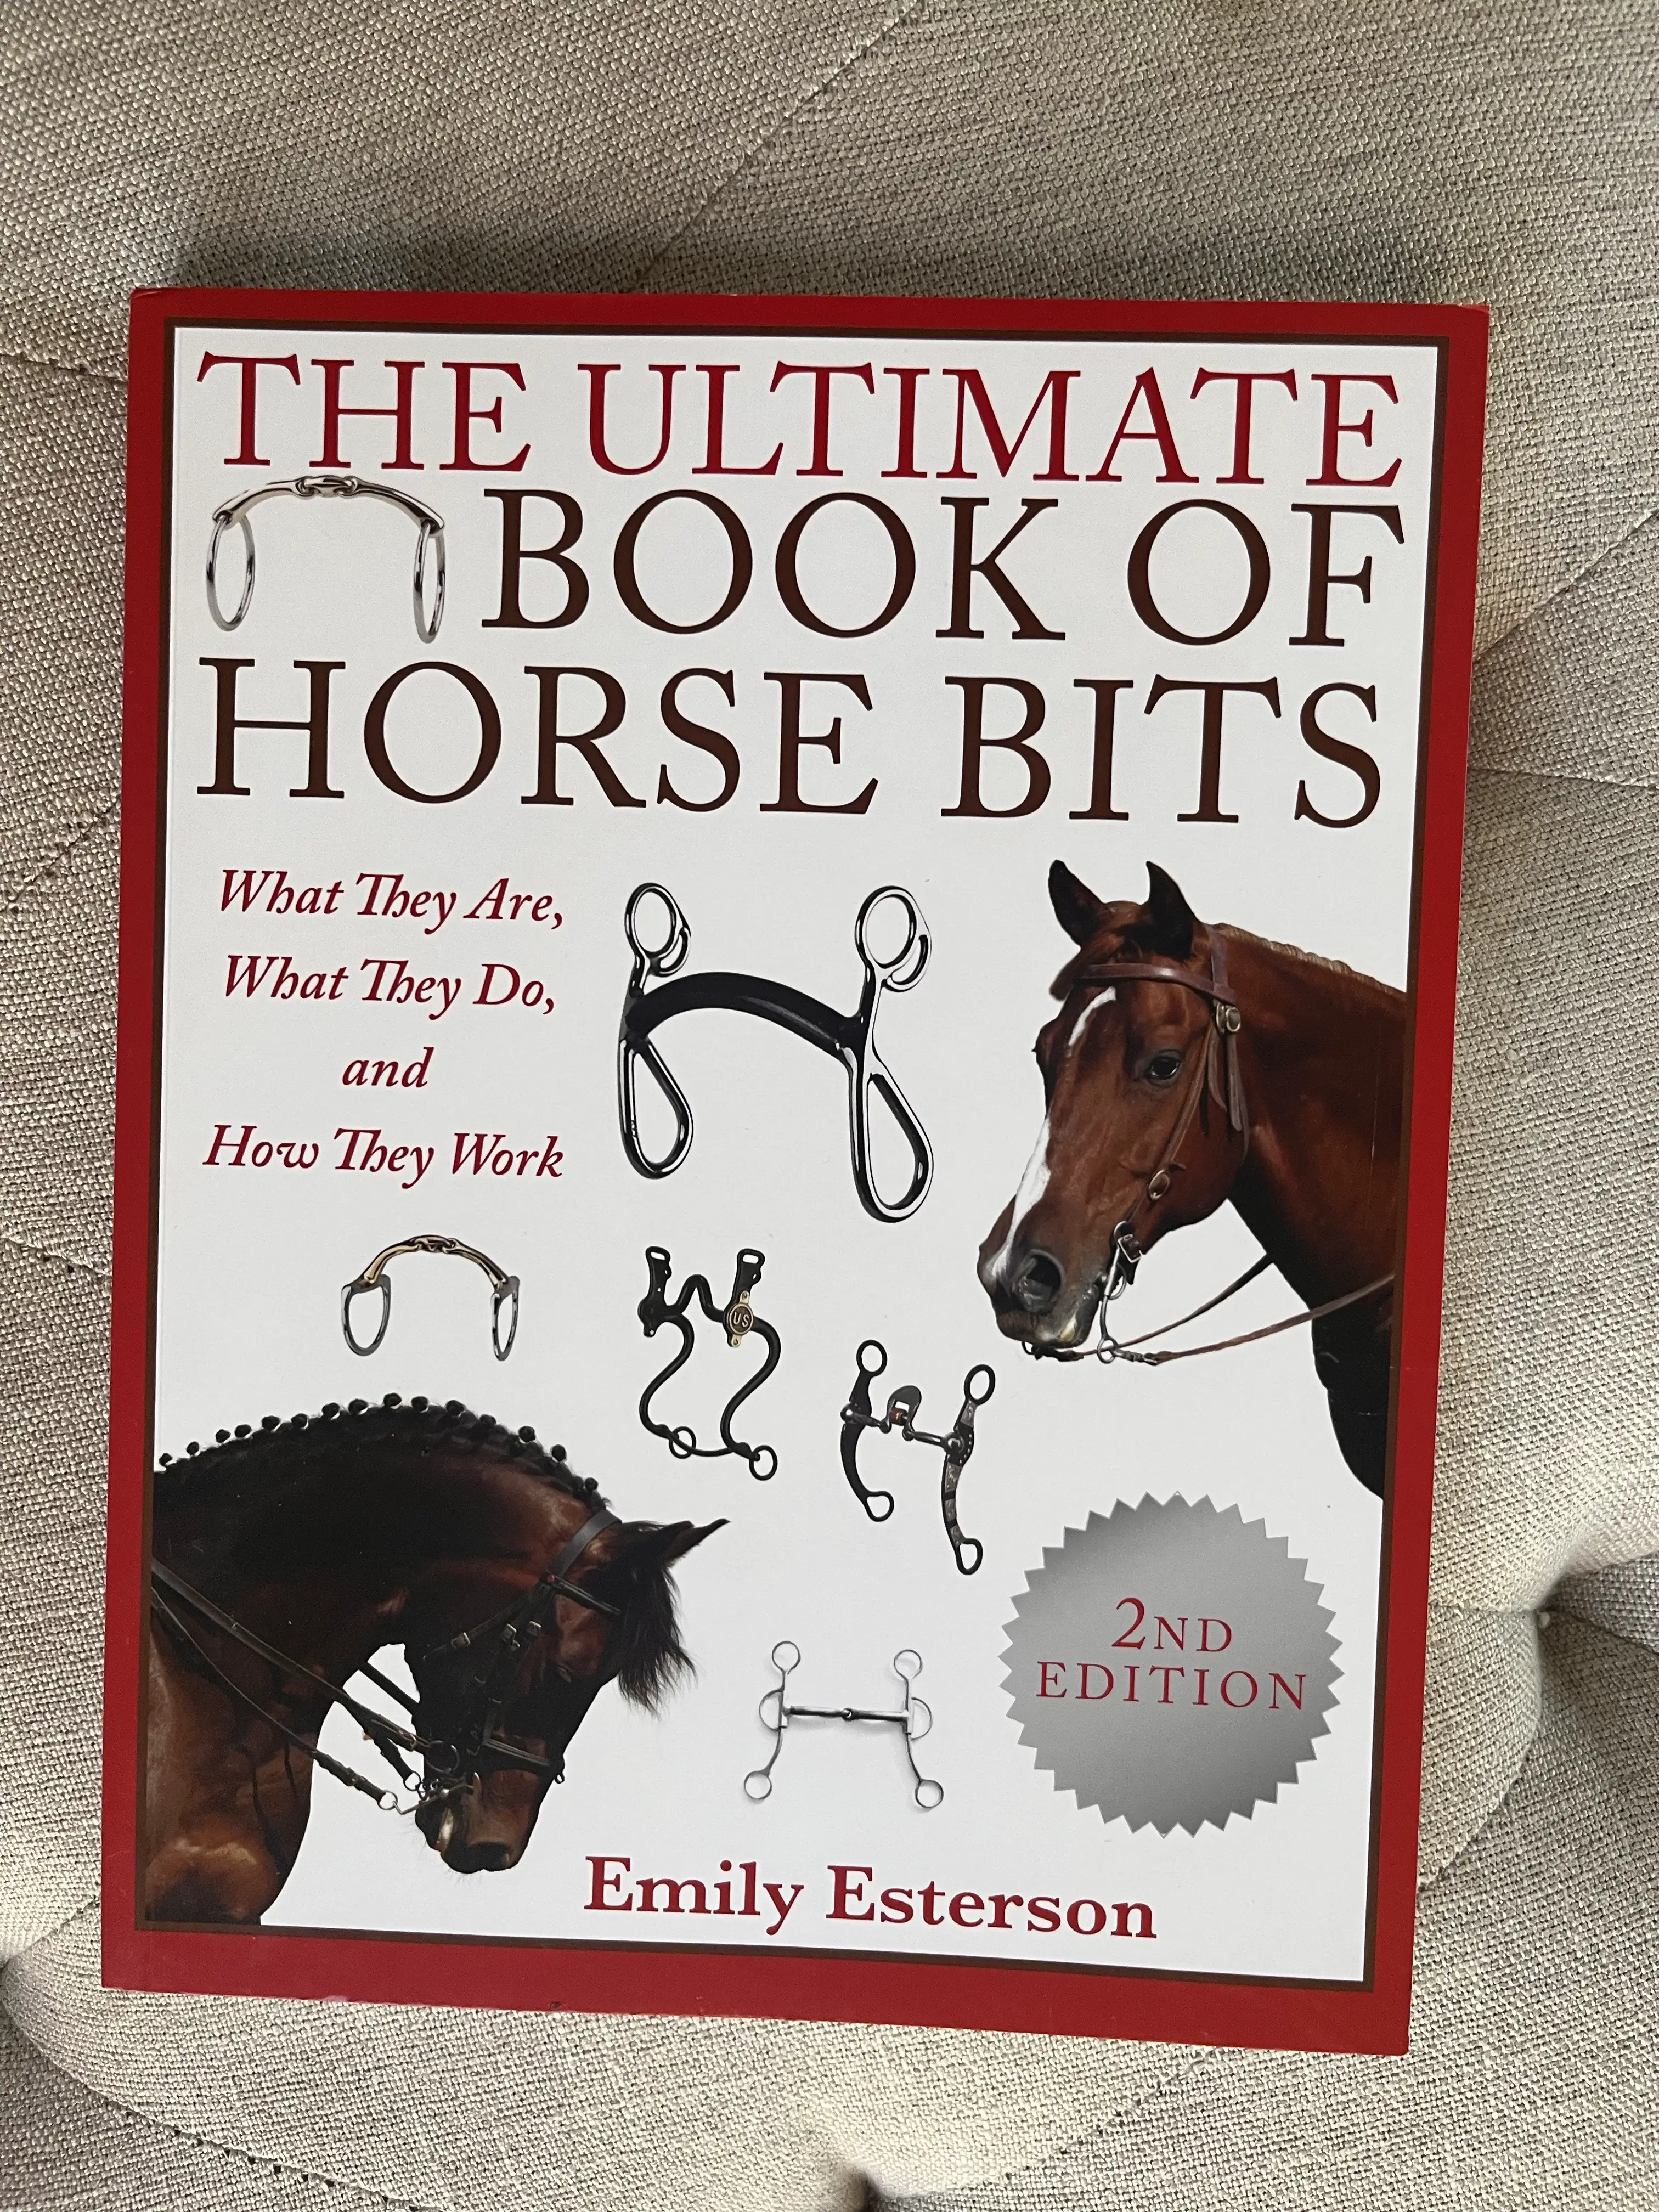 The Ultimate Book Of Horse Bits by Emily Esterson